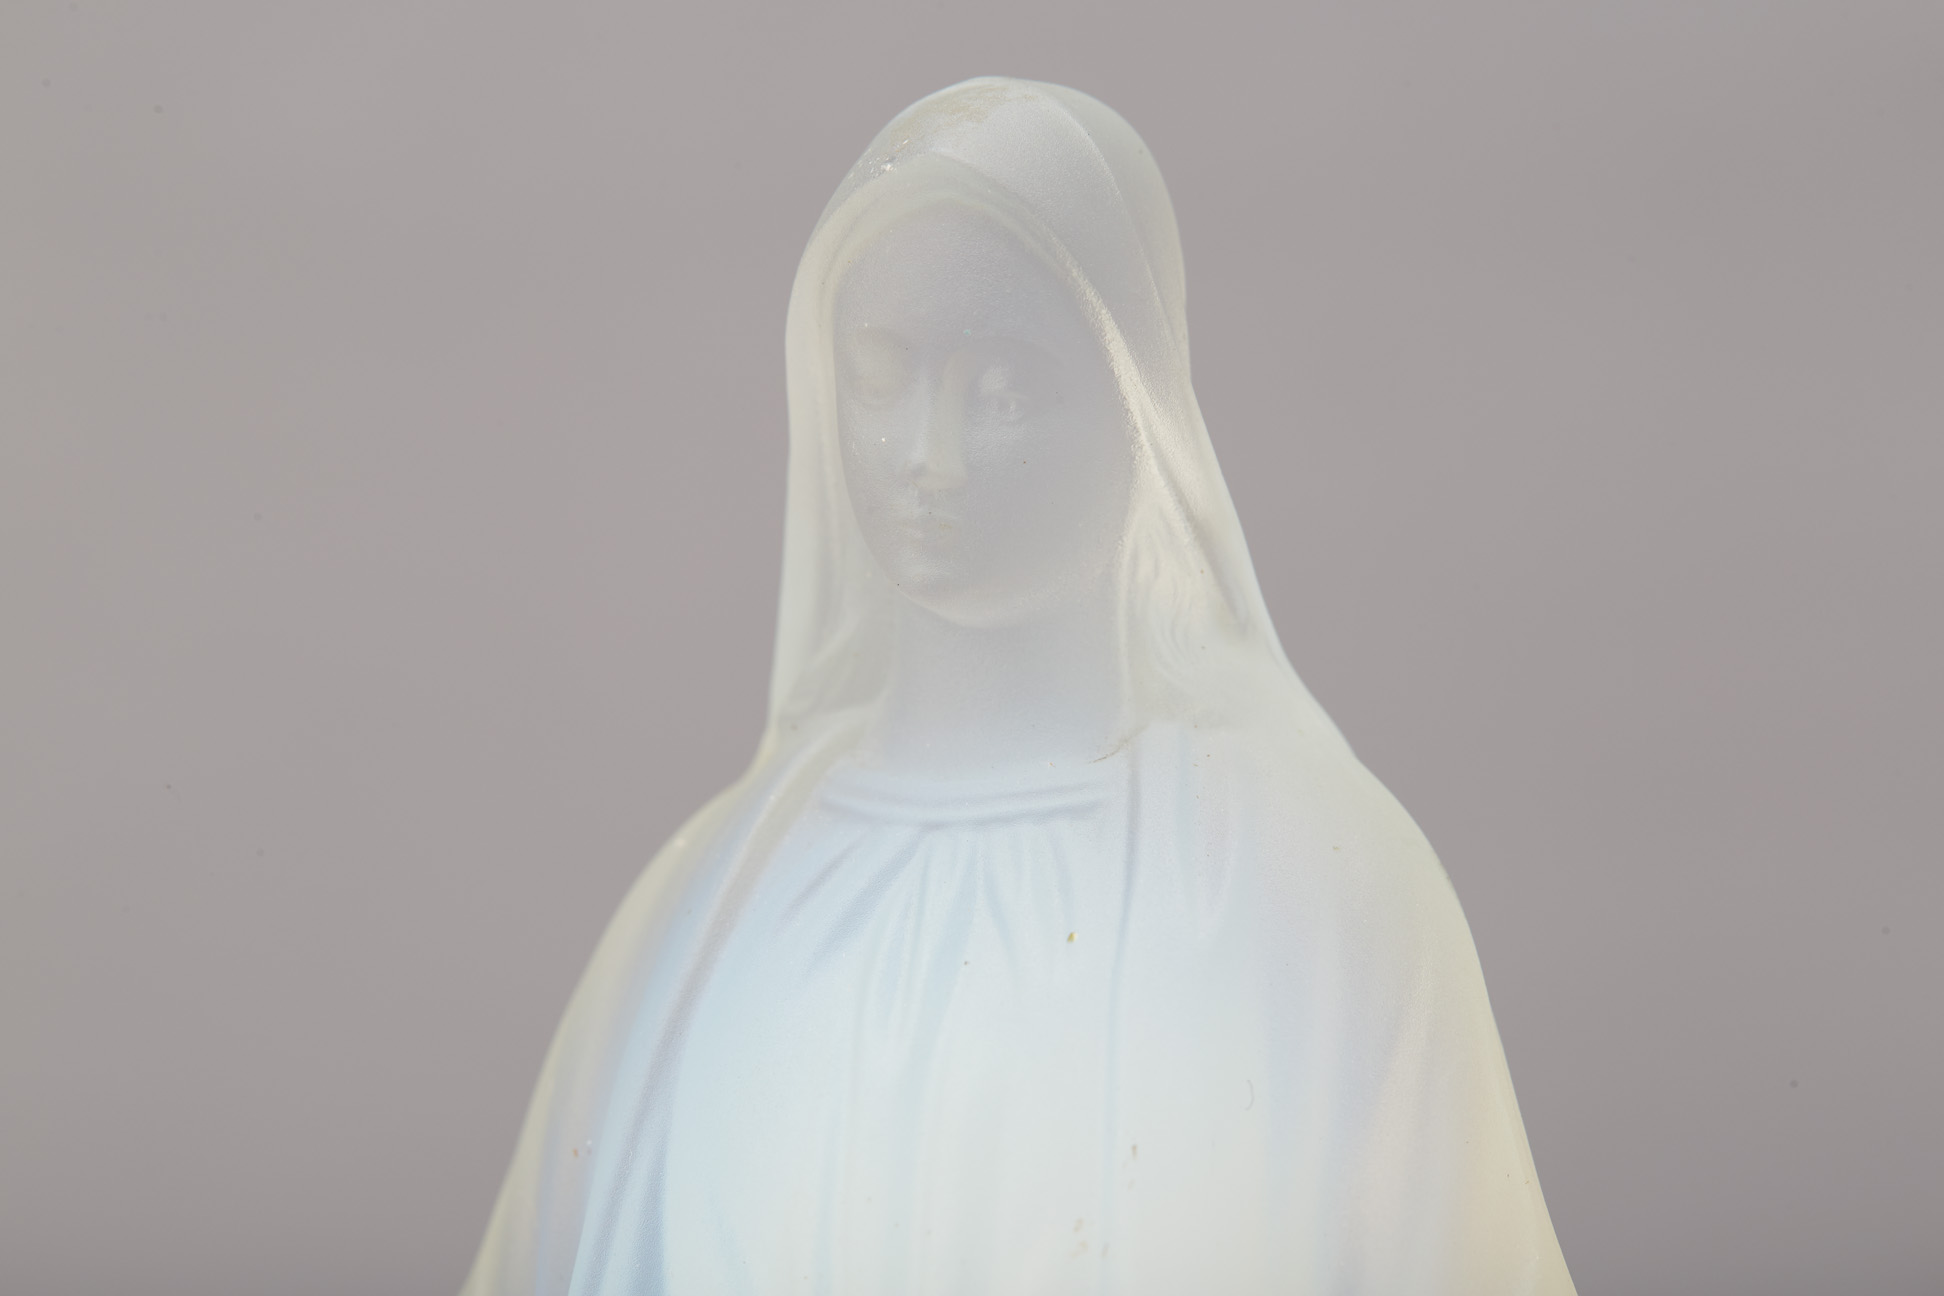 AN ETLING OPALESCENT GLASS FIGURE OF VIRGIN MARY - Image 2 of 2